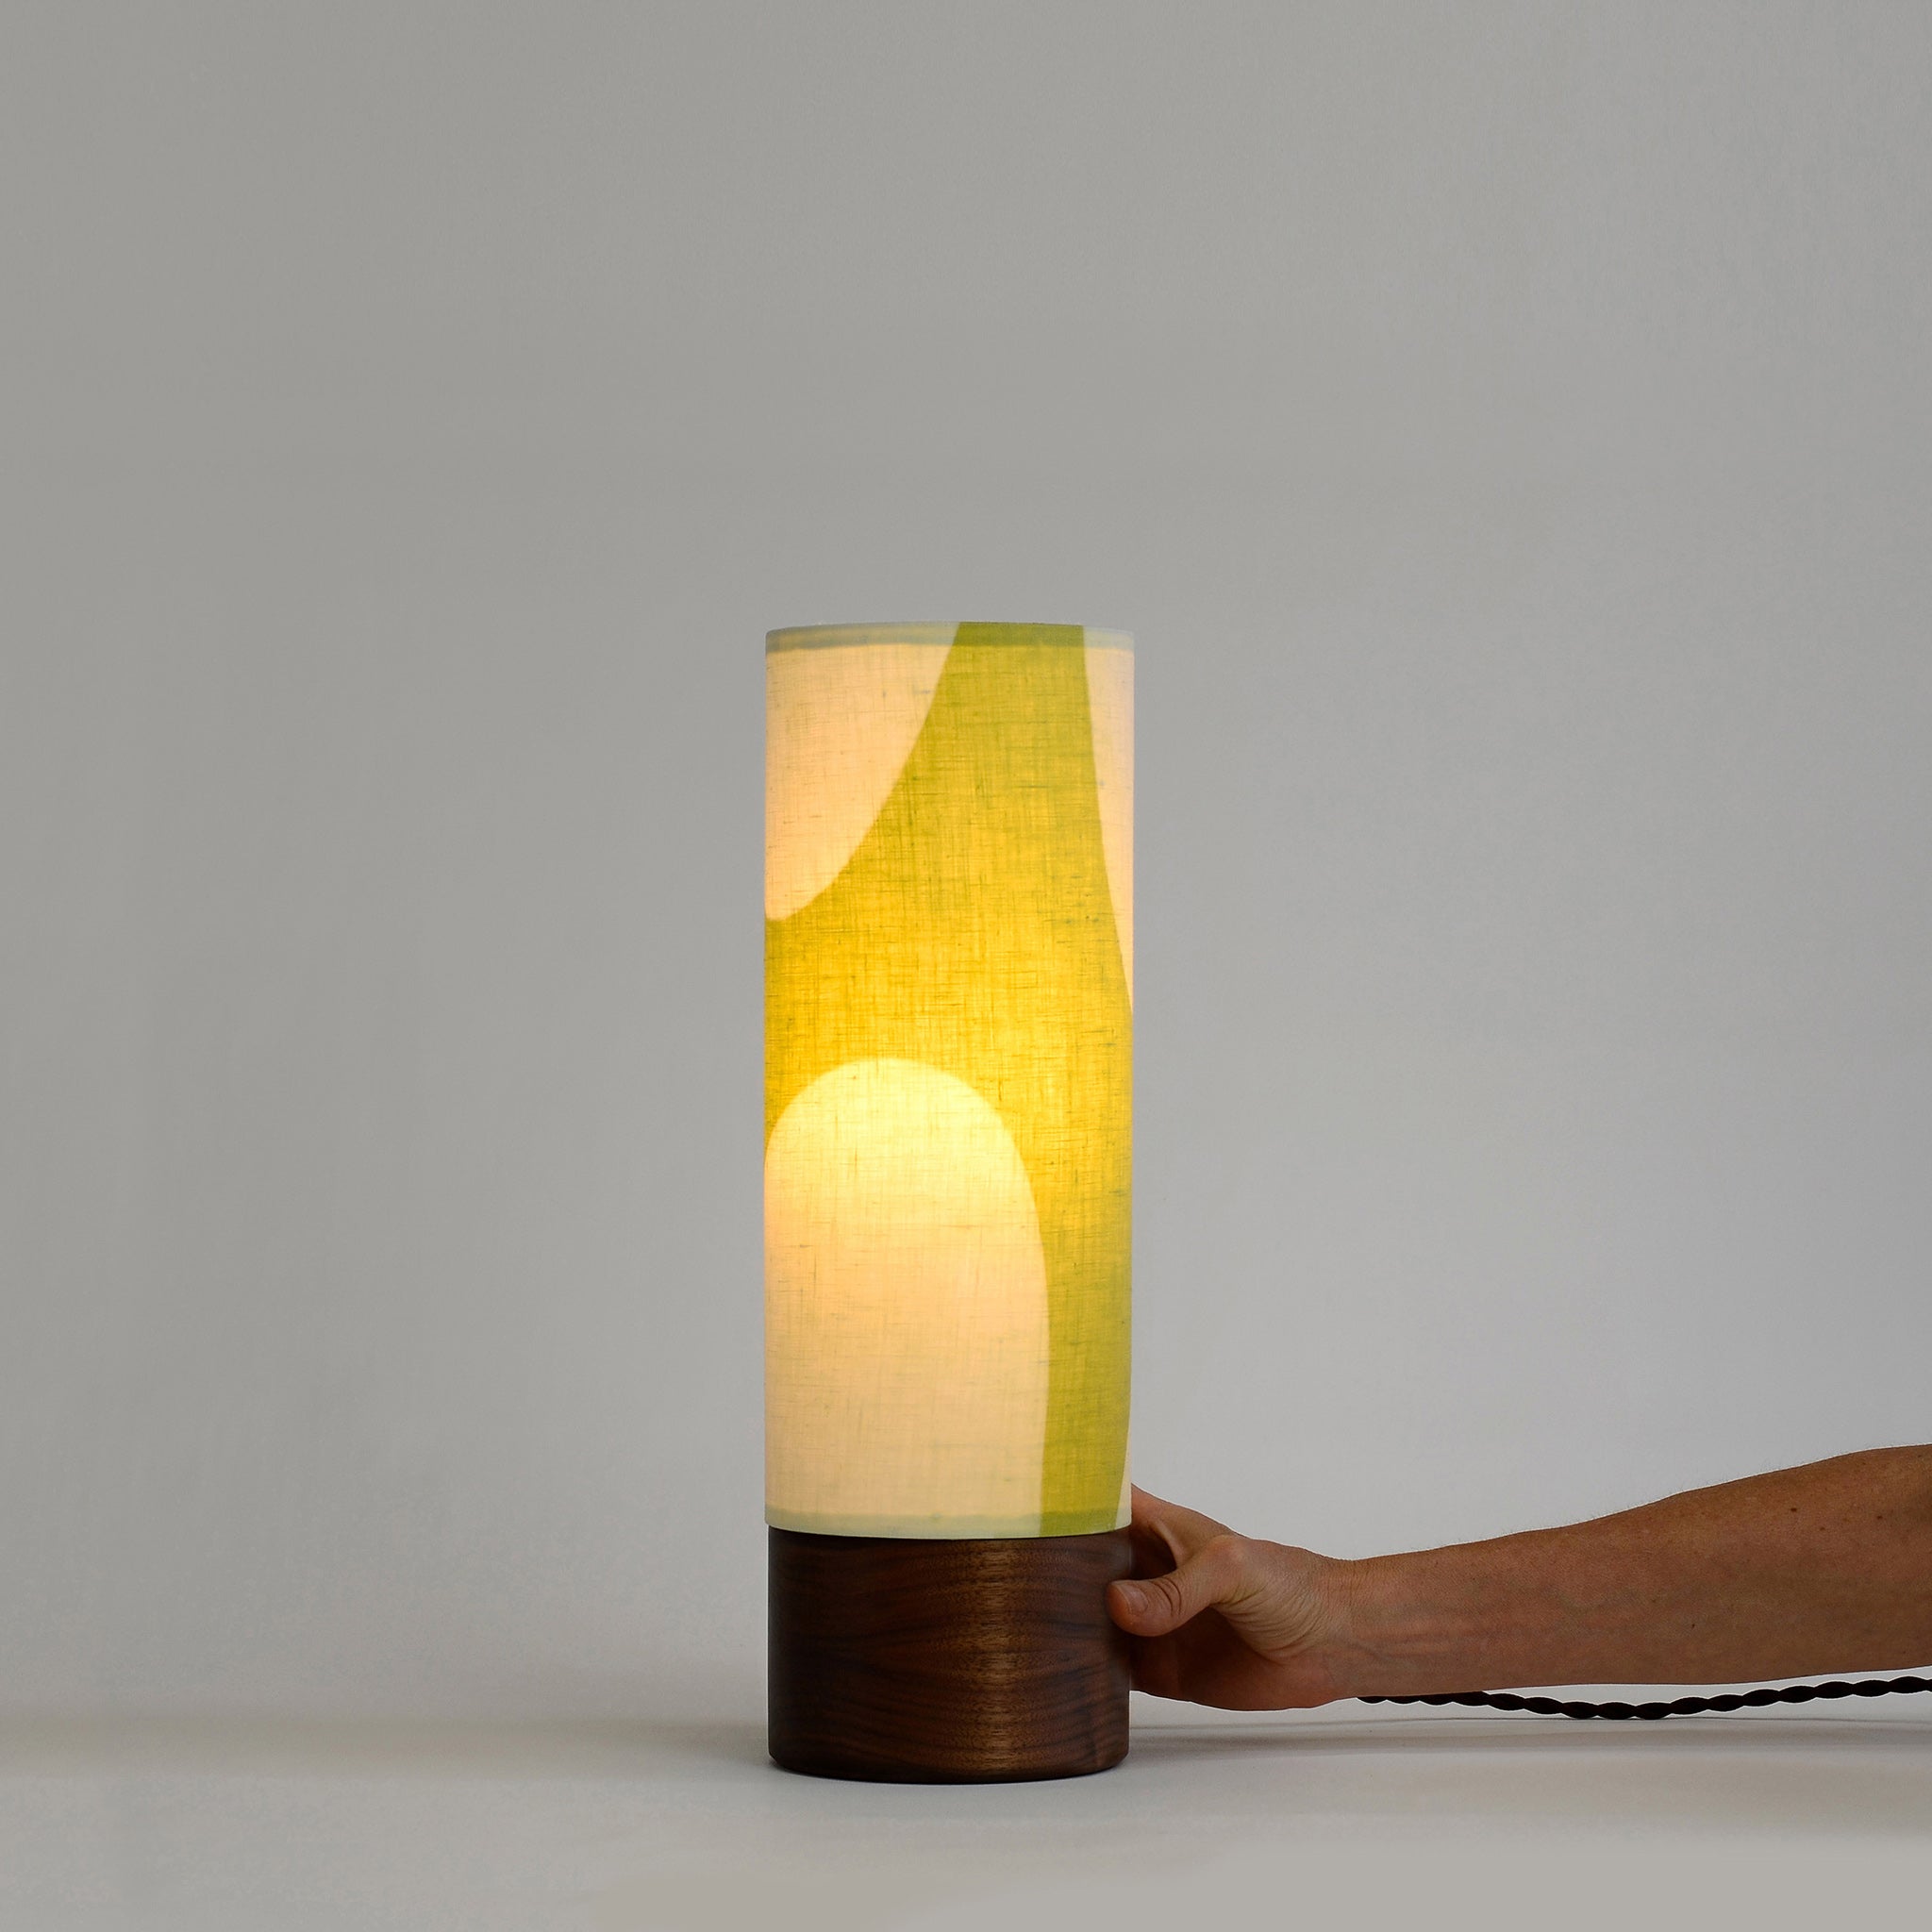 Unique Mid-century Modern Table Lamp for a cozy, warm and calm lighting home interior decoration 